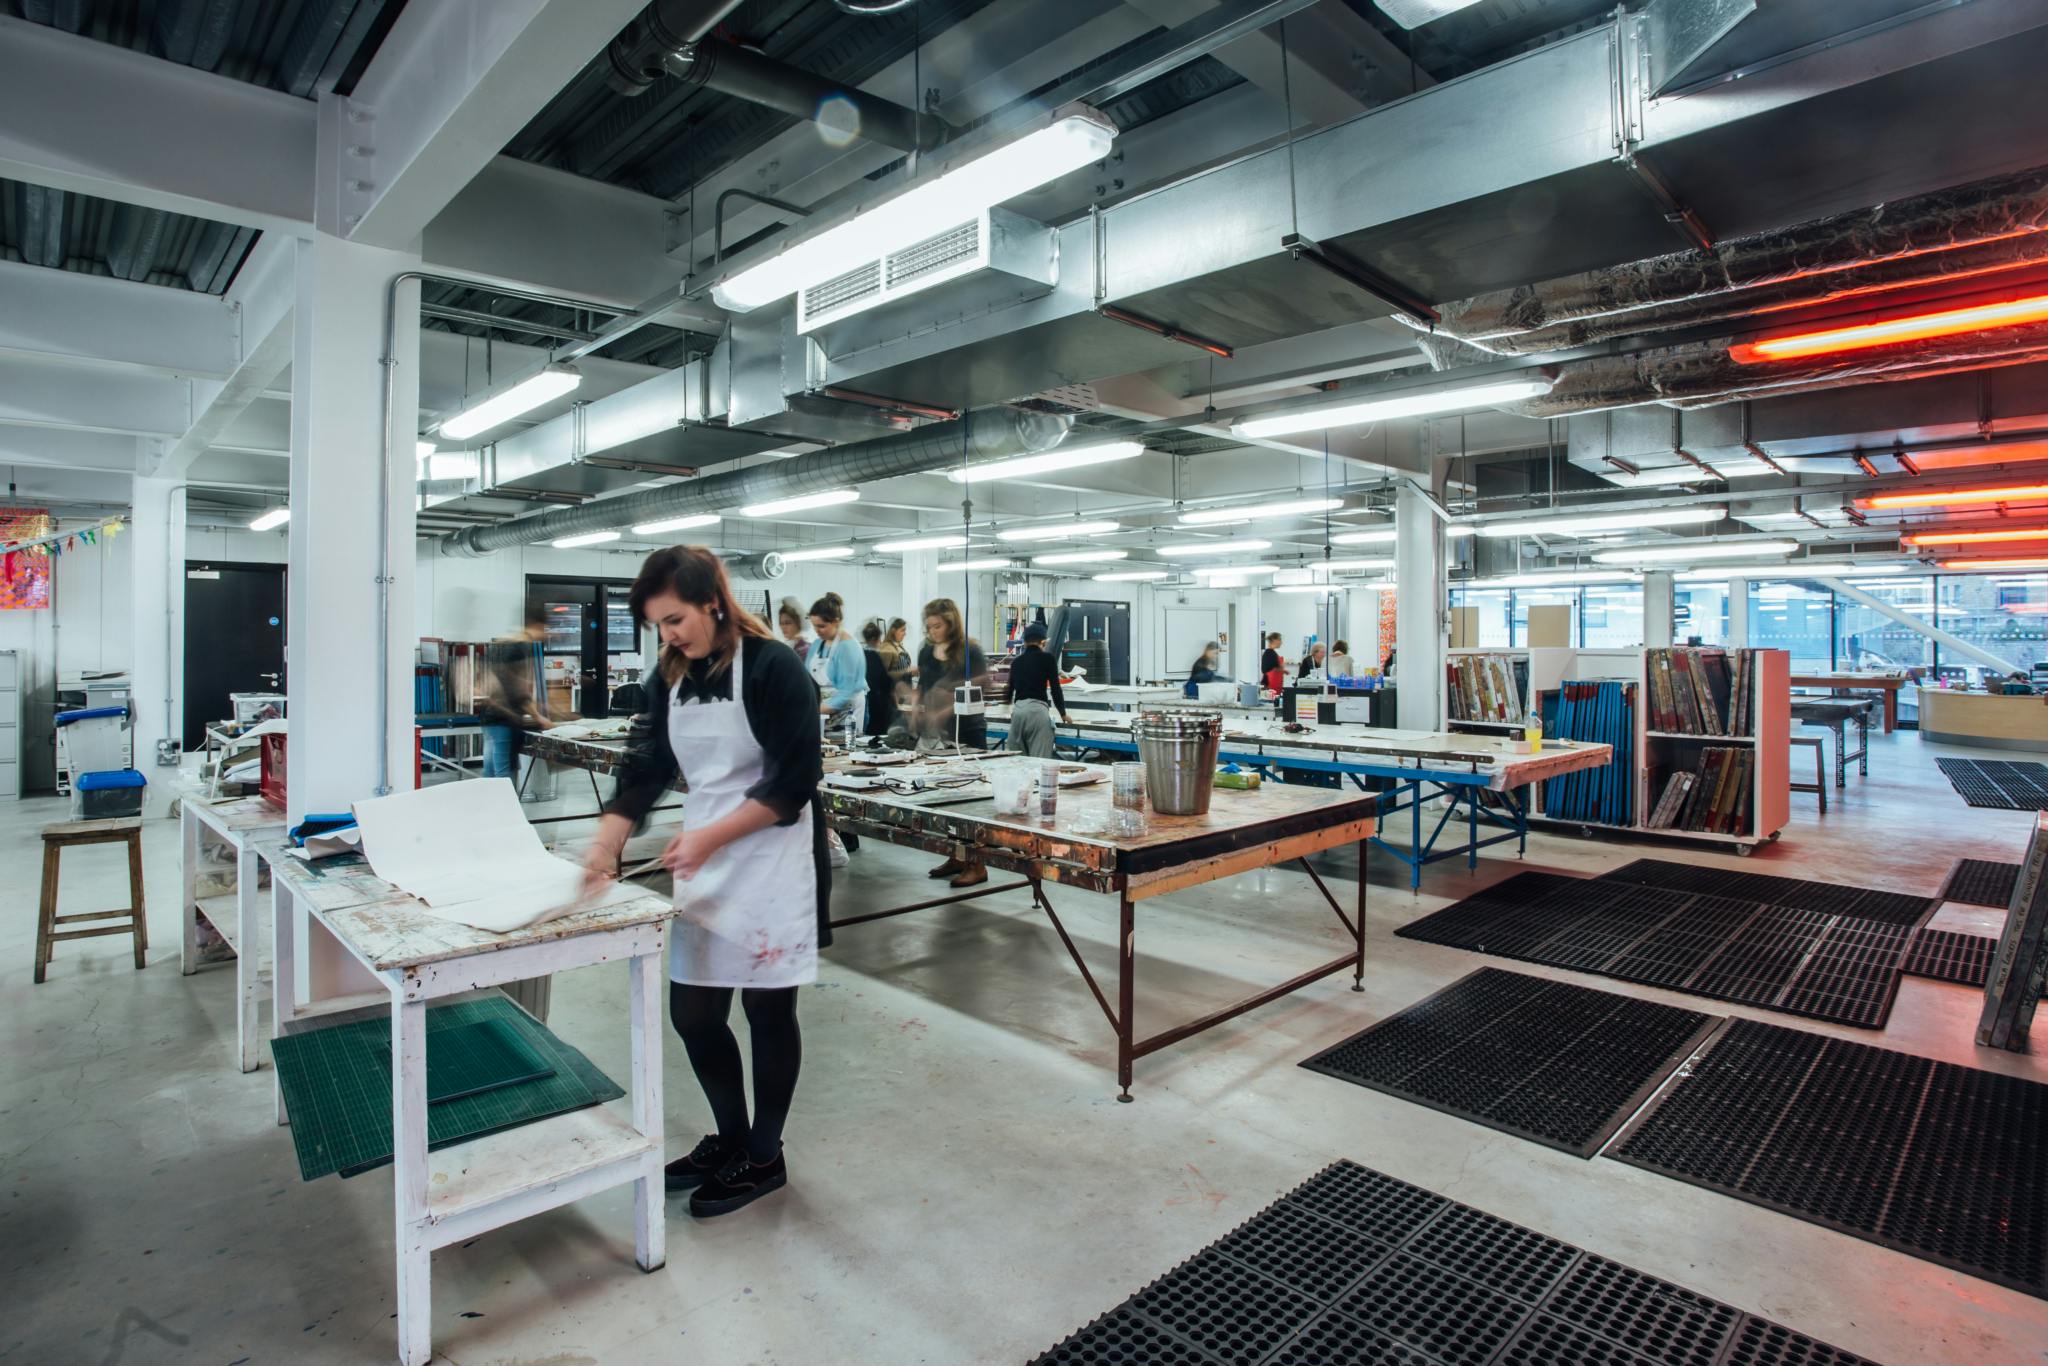 A wide angle shot of Plymouth College of Art's Fabric Lab consisting of work benches, resources and facilities for textiles, printmaking and dyeing